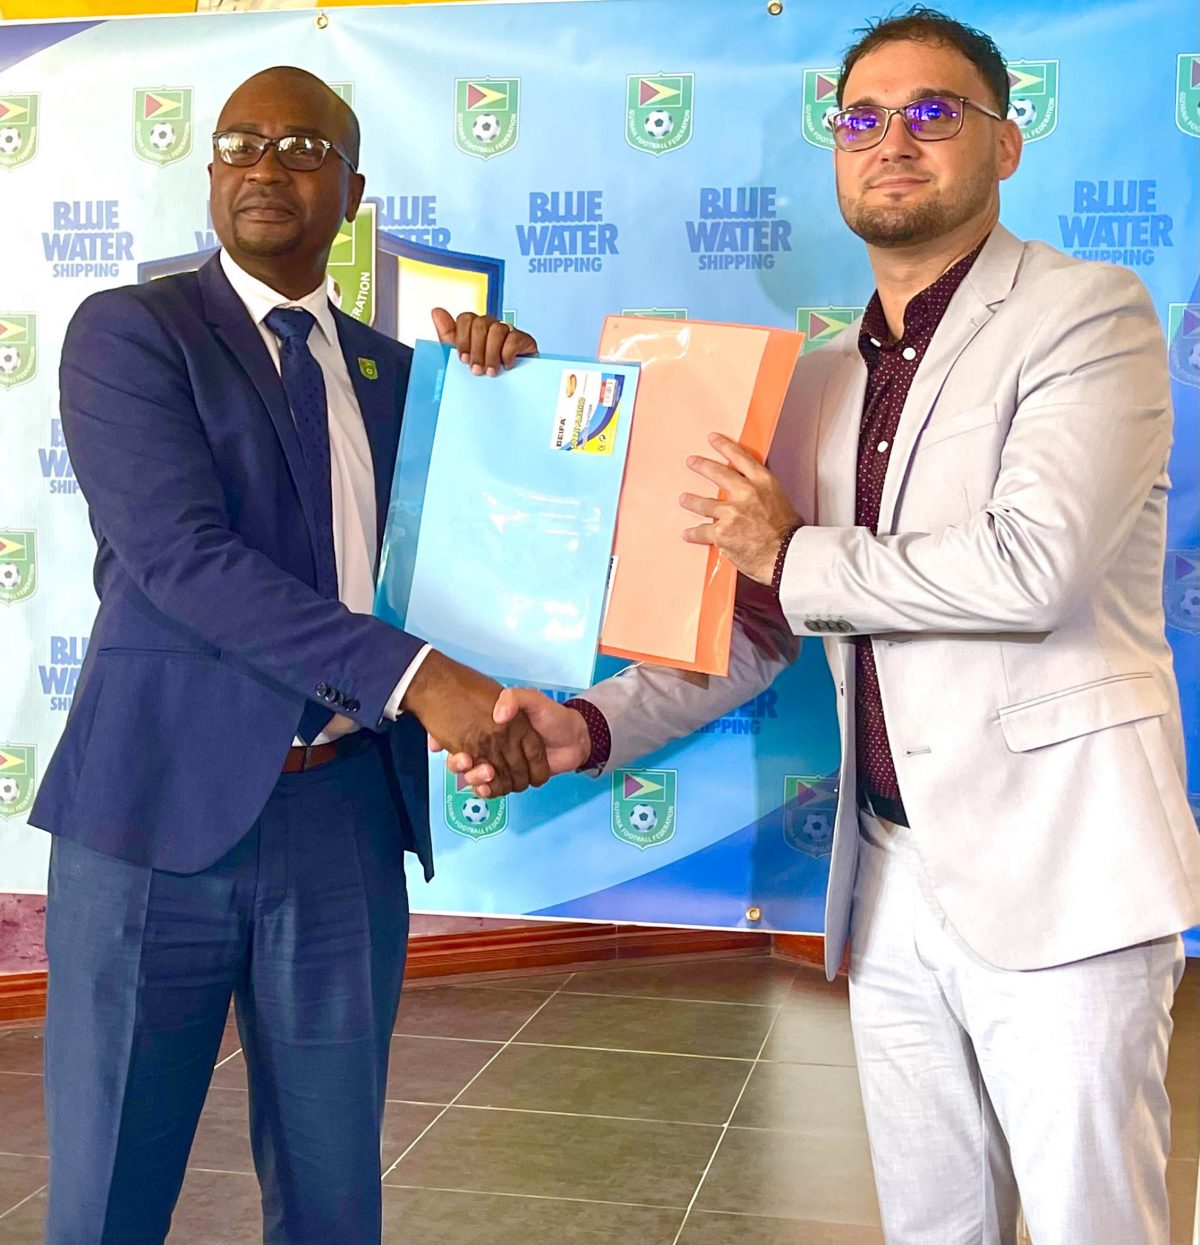 Inked! GFF President Wayne Forde (left) and Richard De Nobrega, Country Manager of Blue Waters Shipping, display the signed MoU which will pave the way for the staging of the Girls U15 Developmental League.